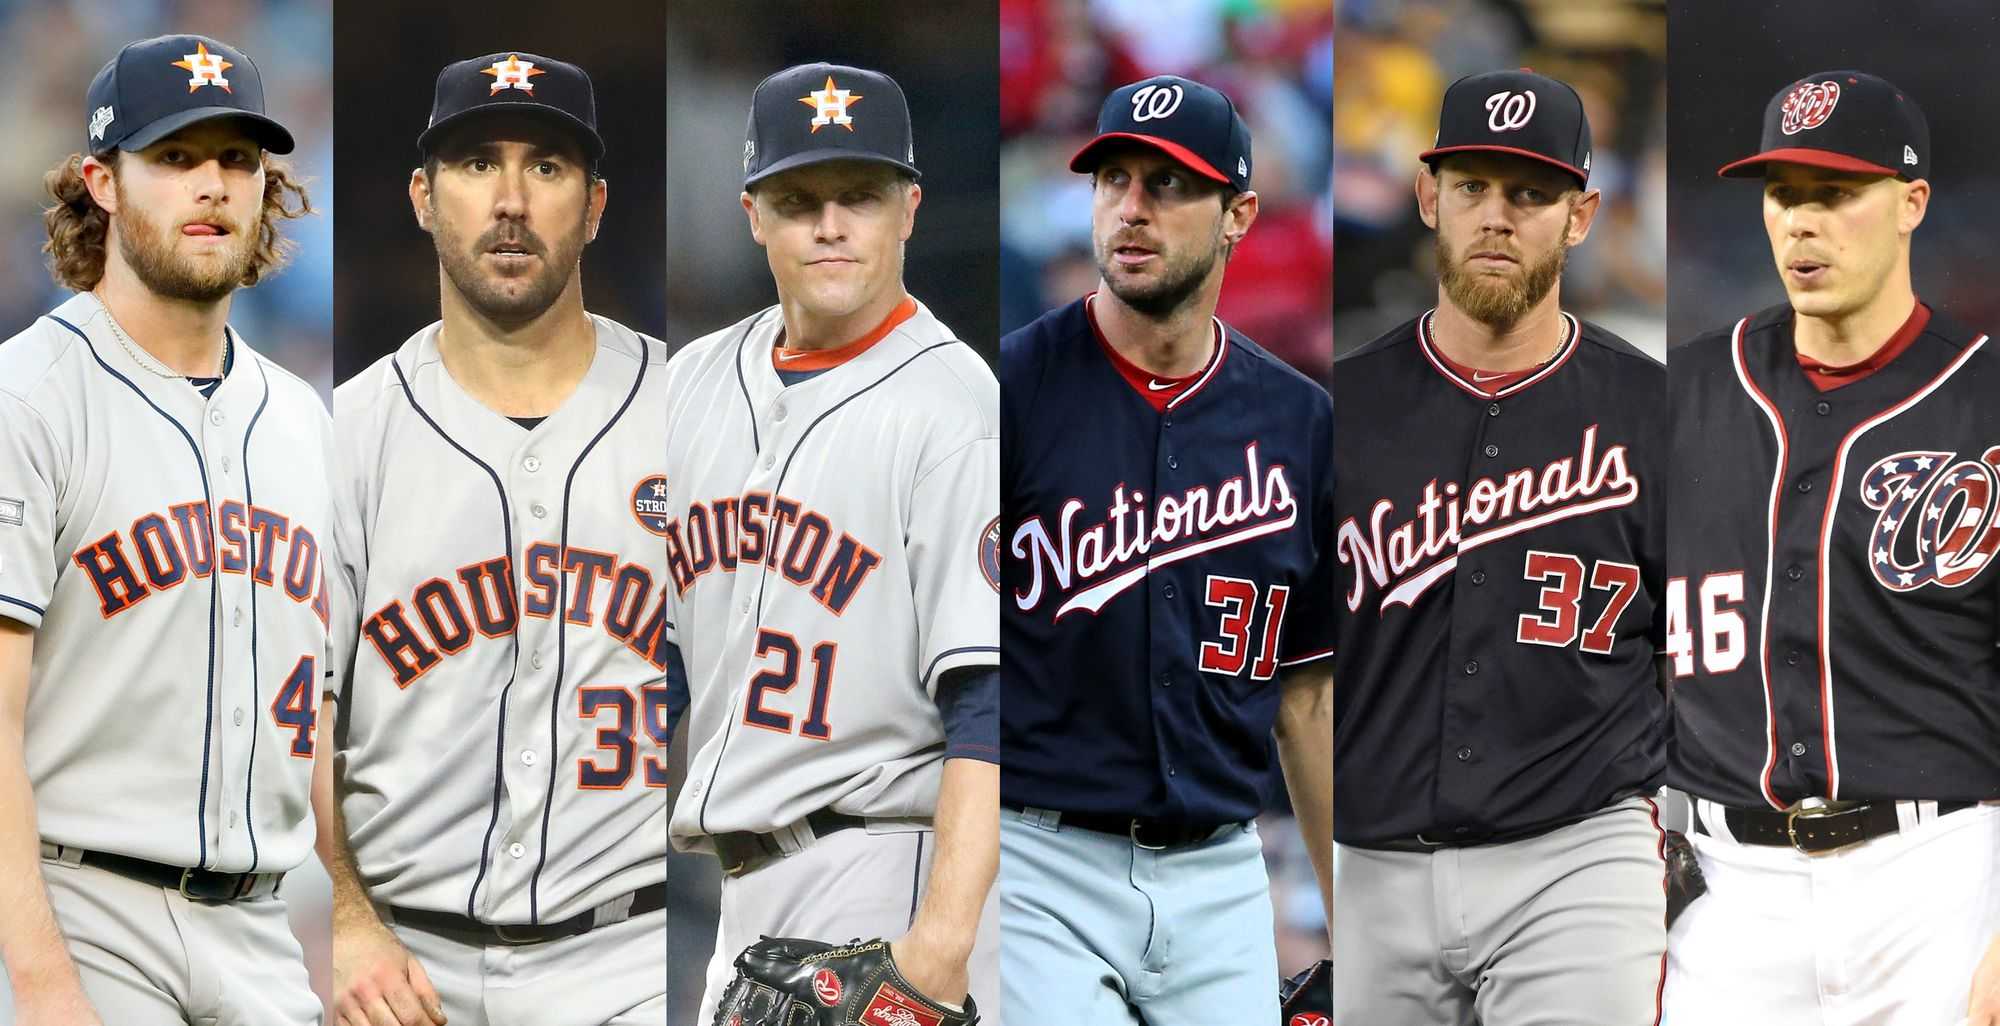  2019 World Series Preview